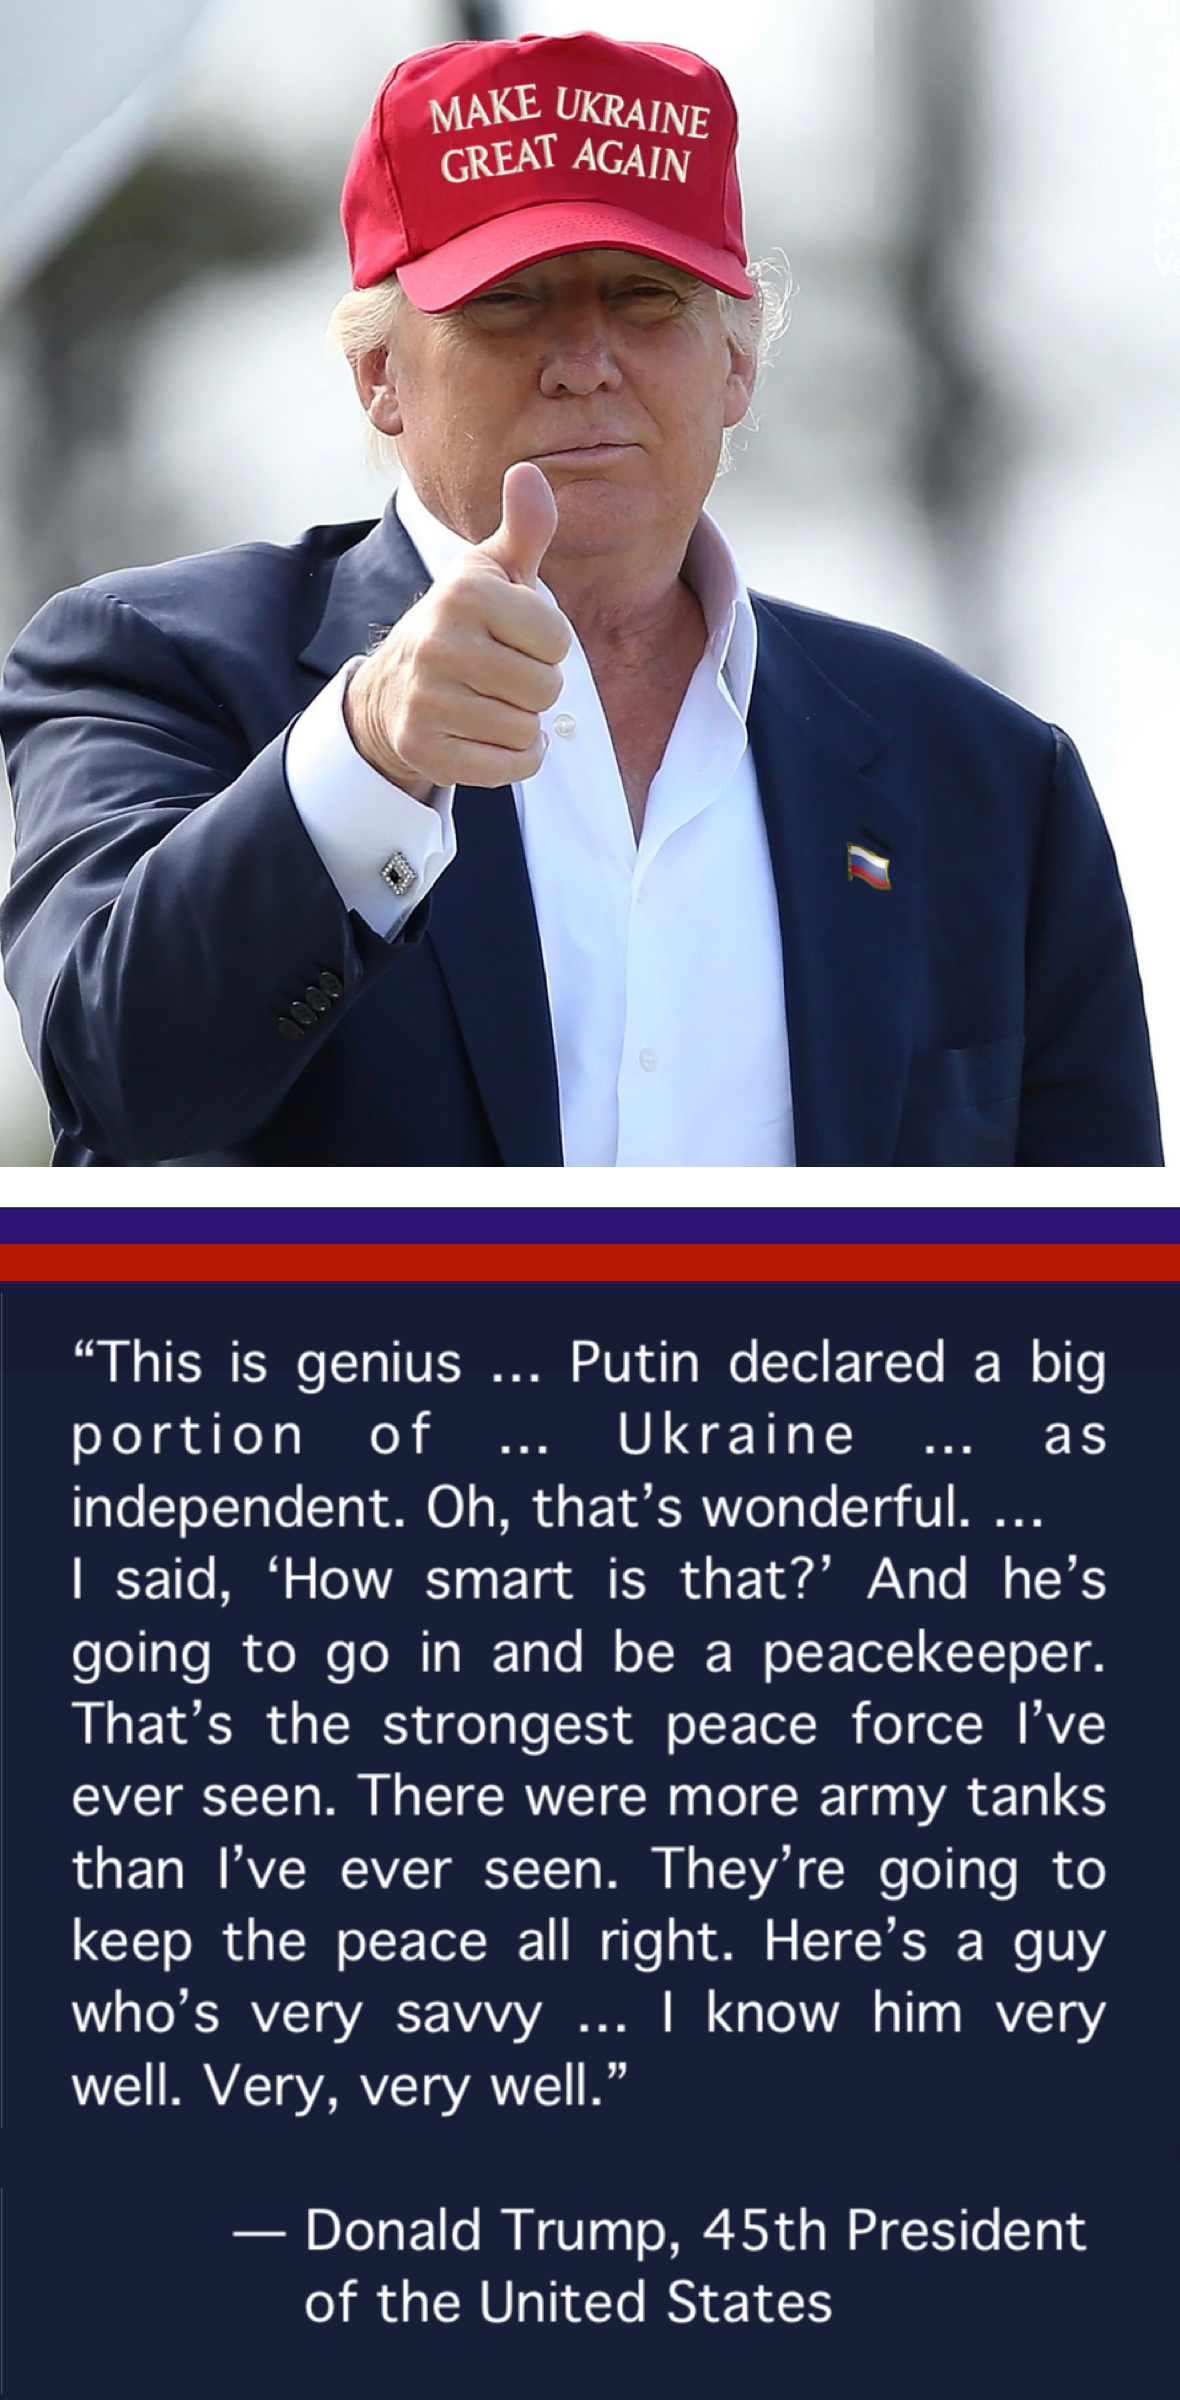 Trump Quote About Russia Invading Ukraine Blank Meme Template